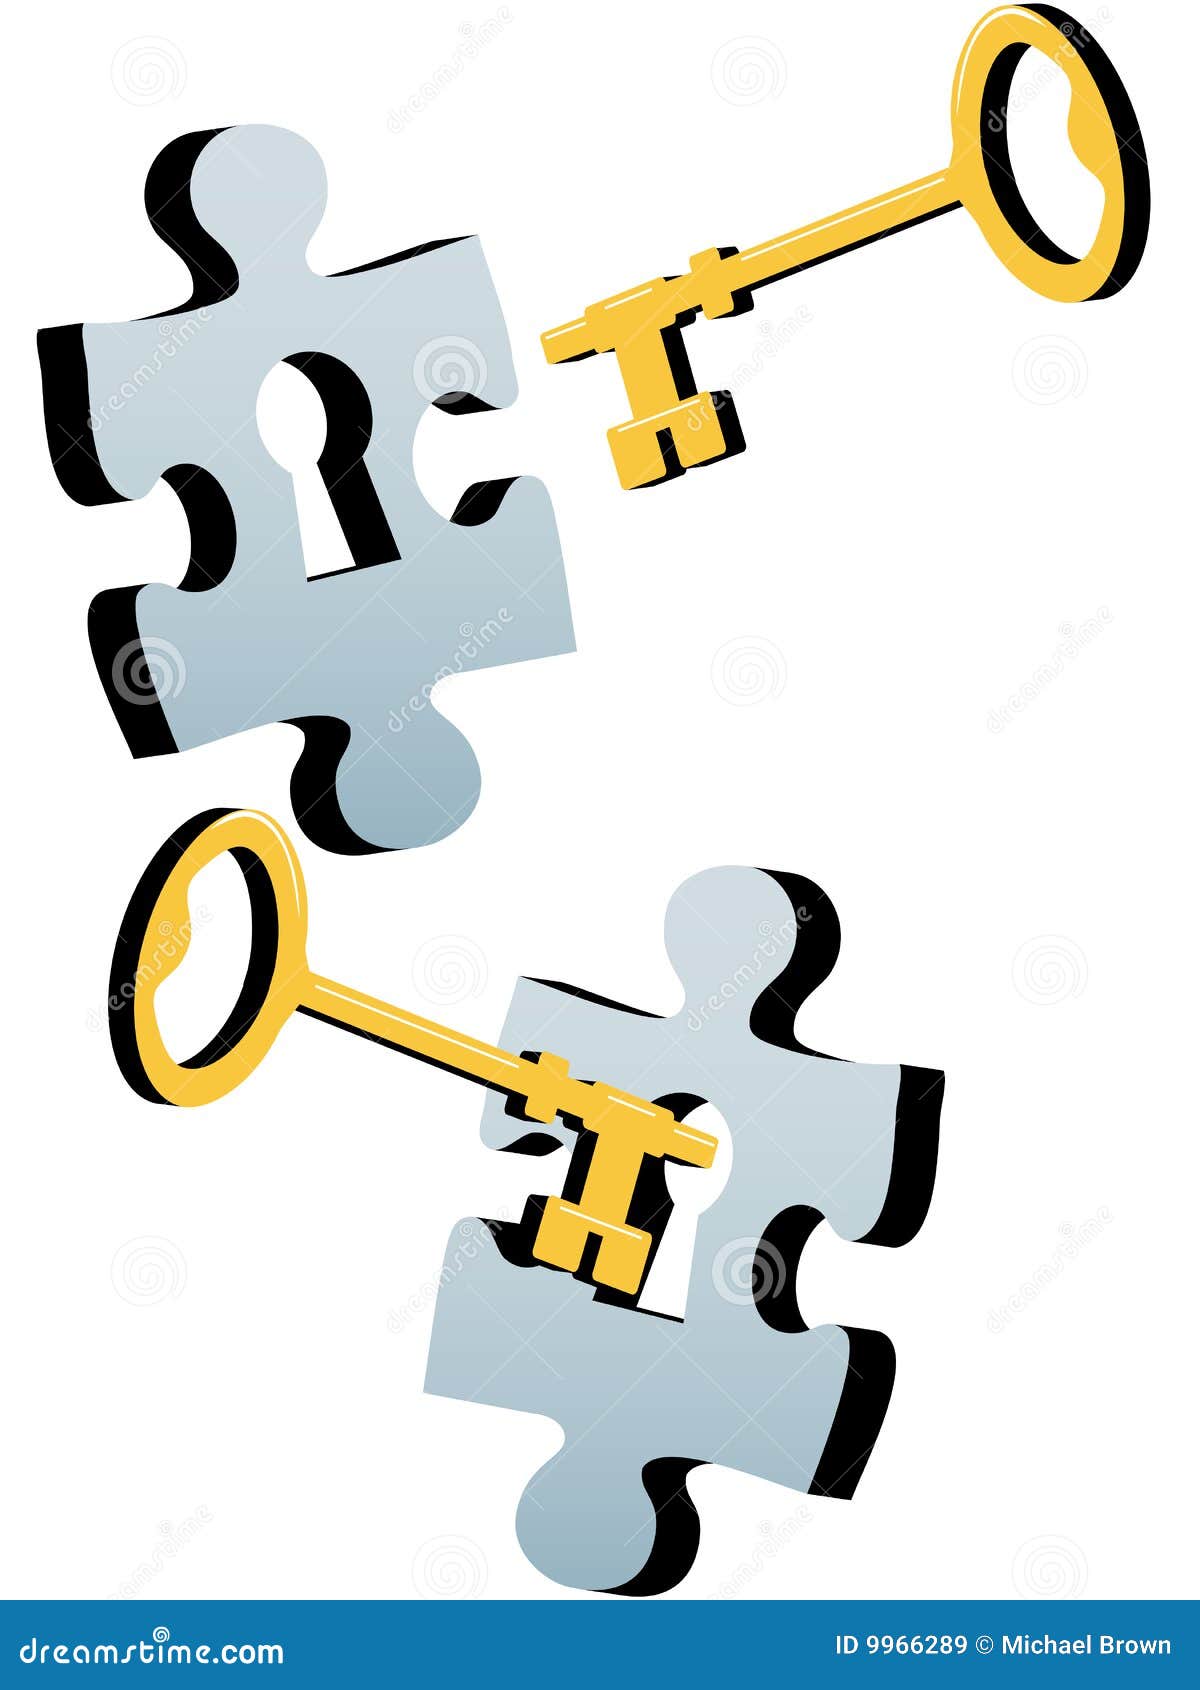 key to unlock the lock and solve jigsaw puzzle